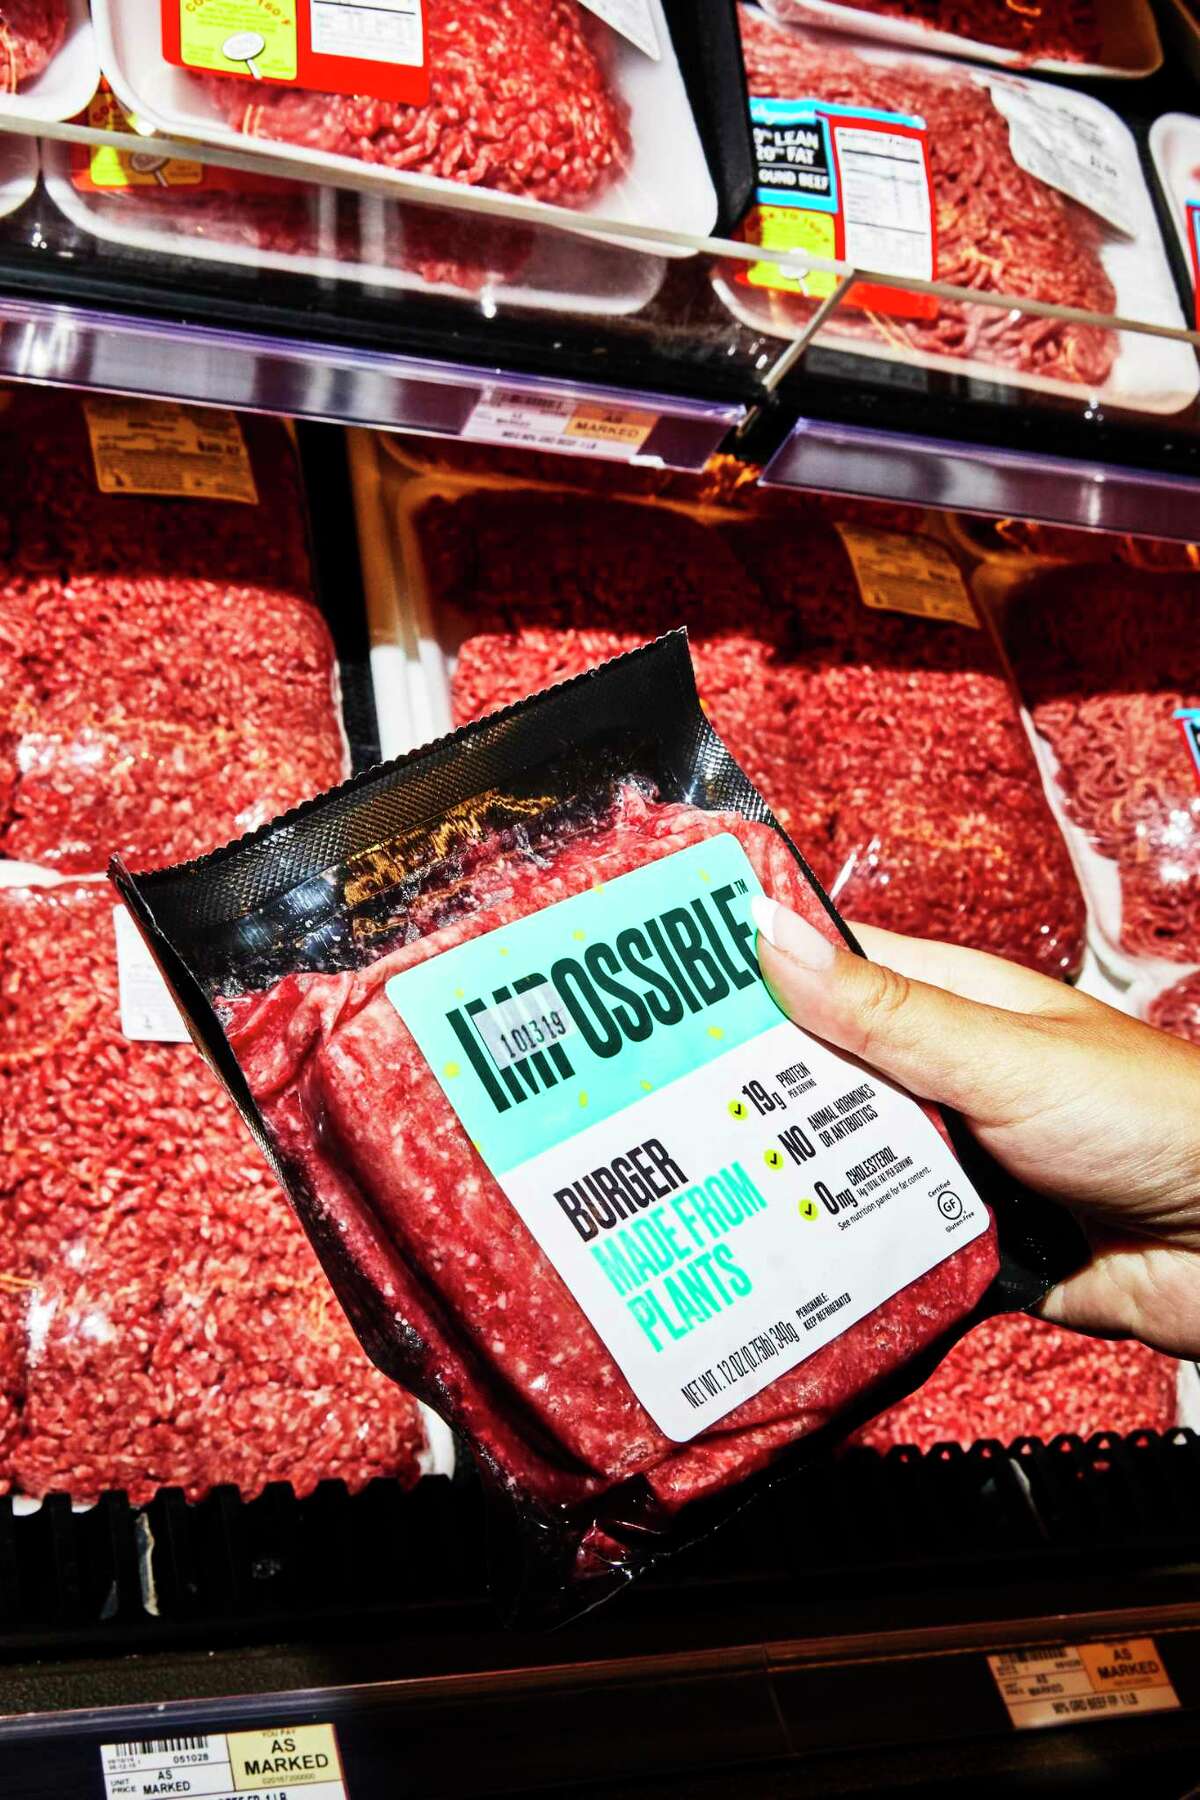 With plant-based burgers, sausages and chicken increasingly popular and available in fast-food restaurants and grocery stores across the United States, a new group of companies has started making meatless meat: the food conglomerates and meat producers that Beyond Meat and Impossible Foods originally set out to disrupt.